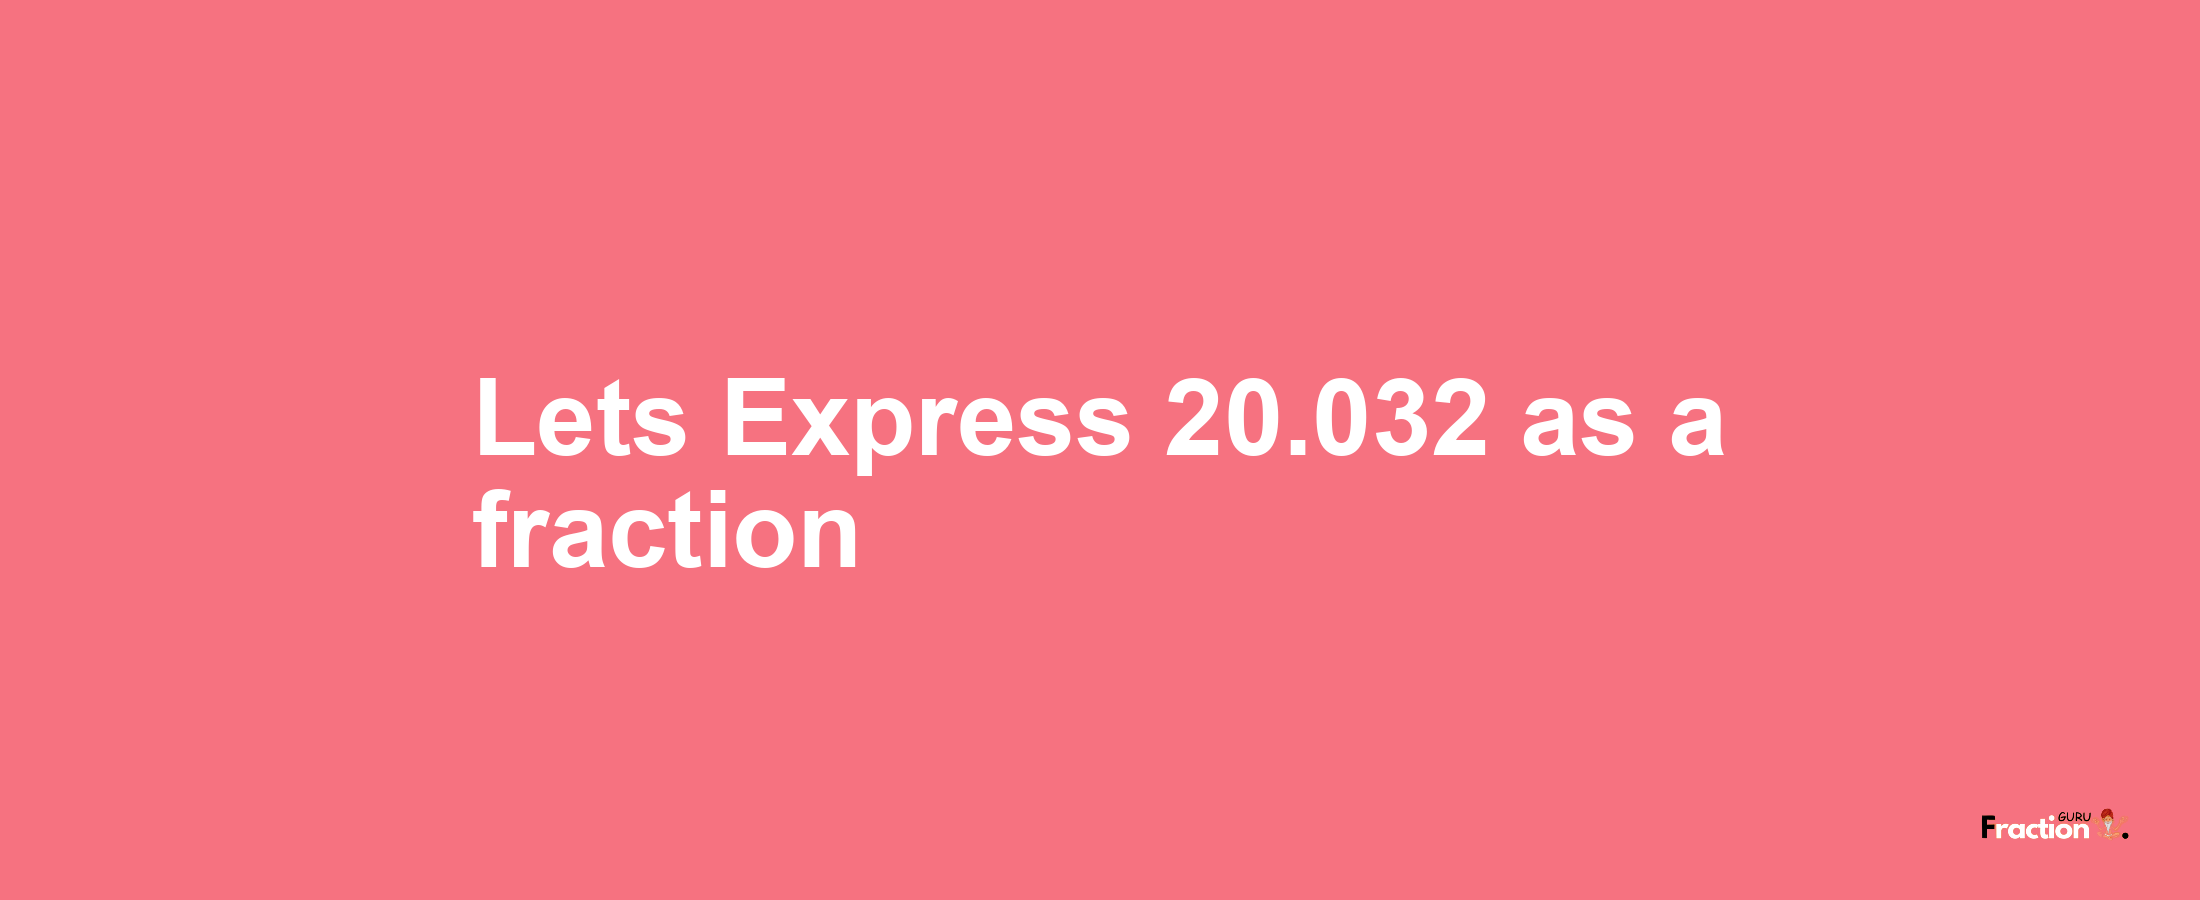 Lets Express 20.032 as afraction